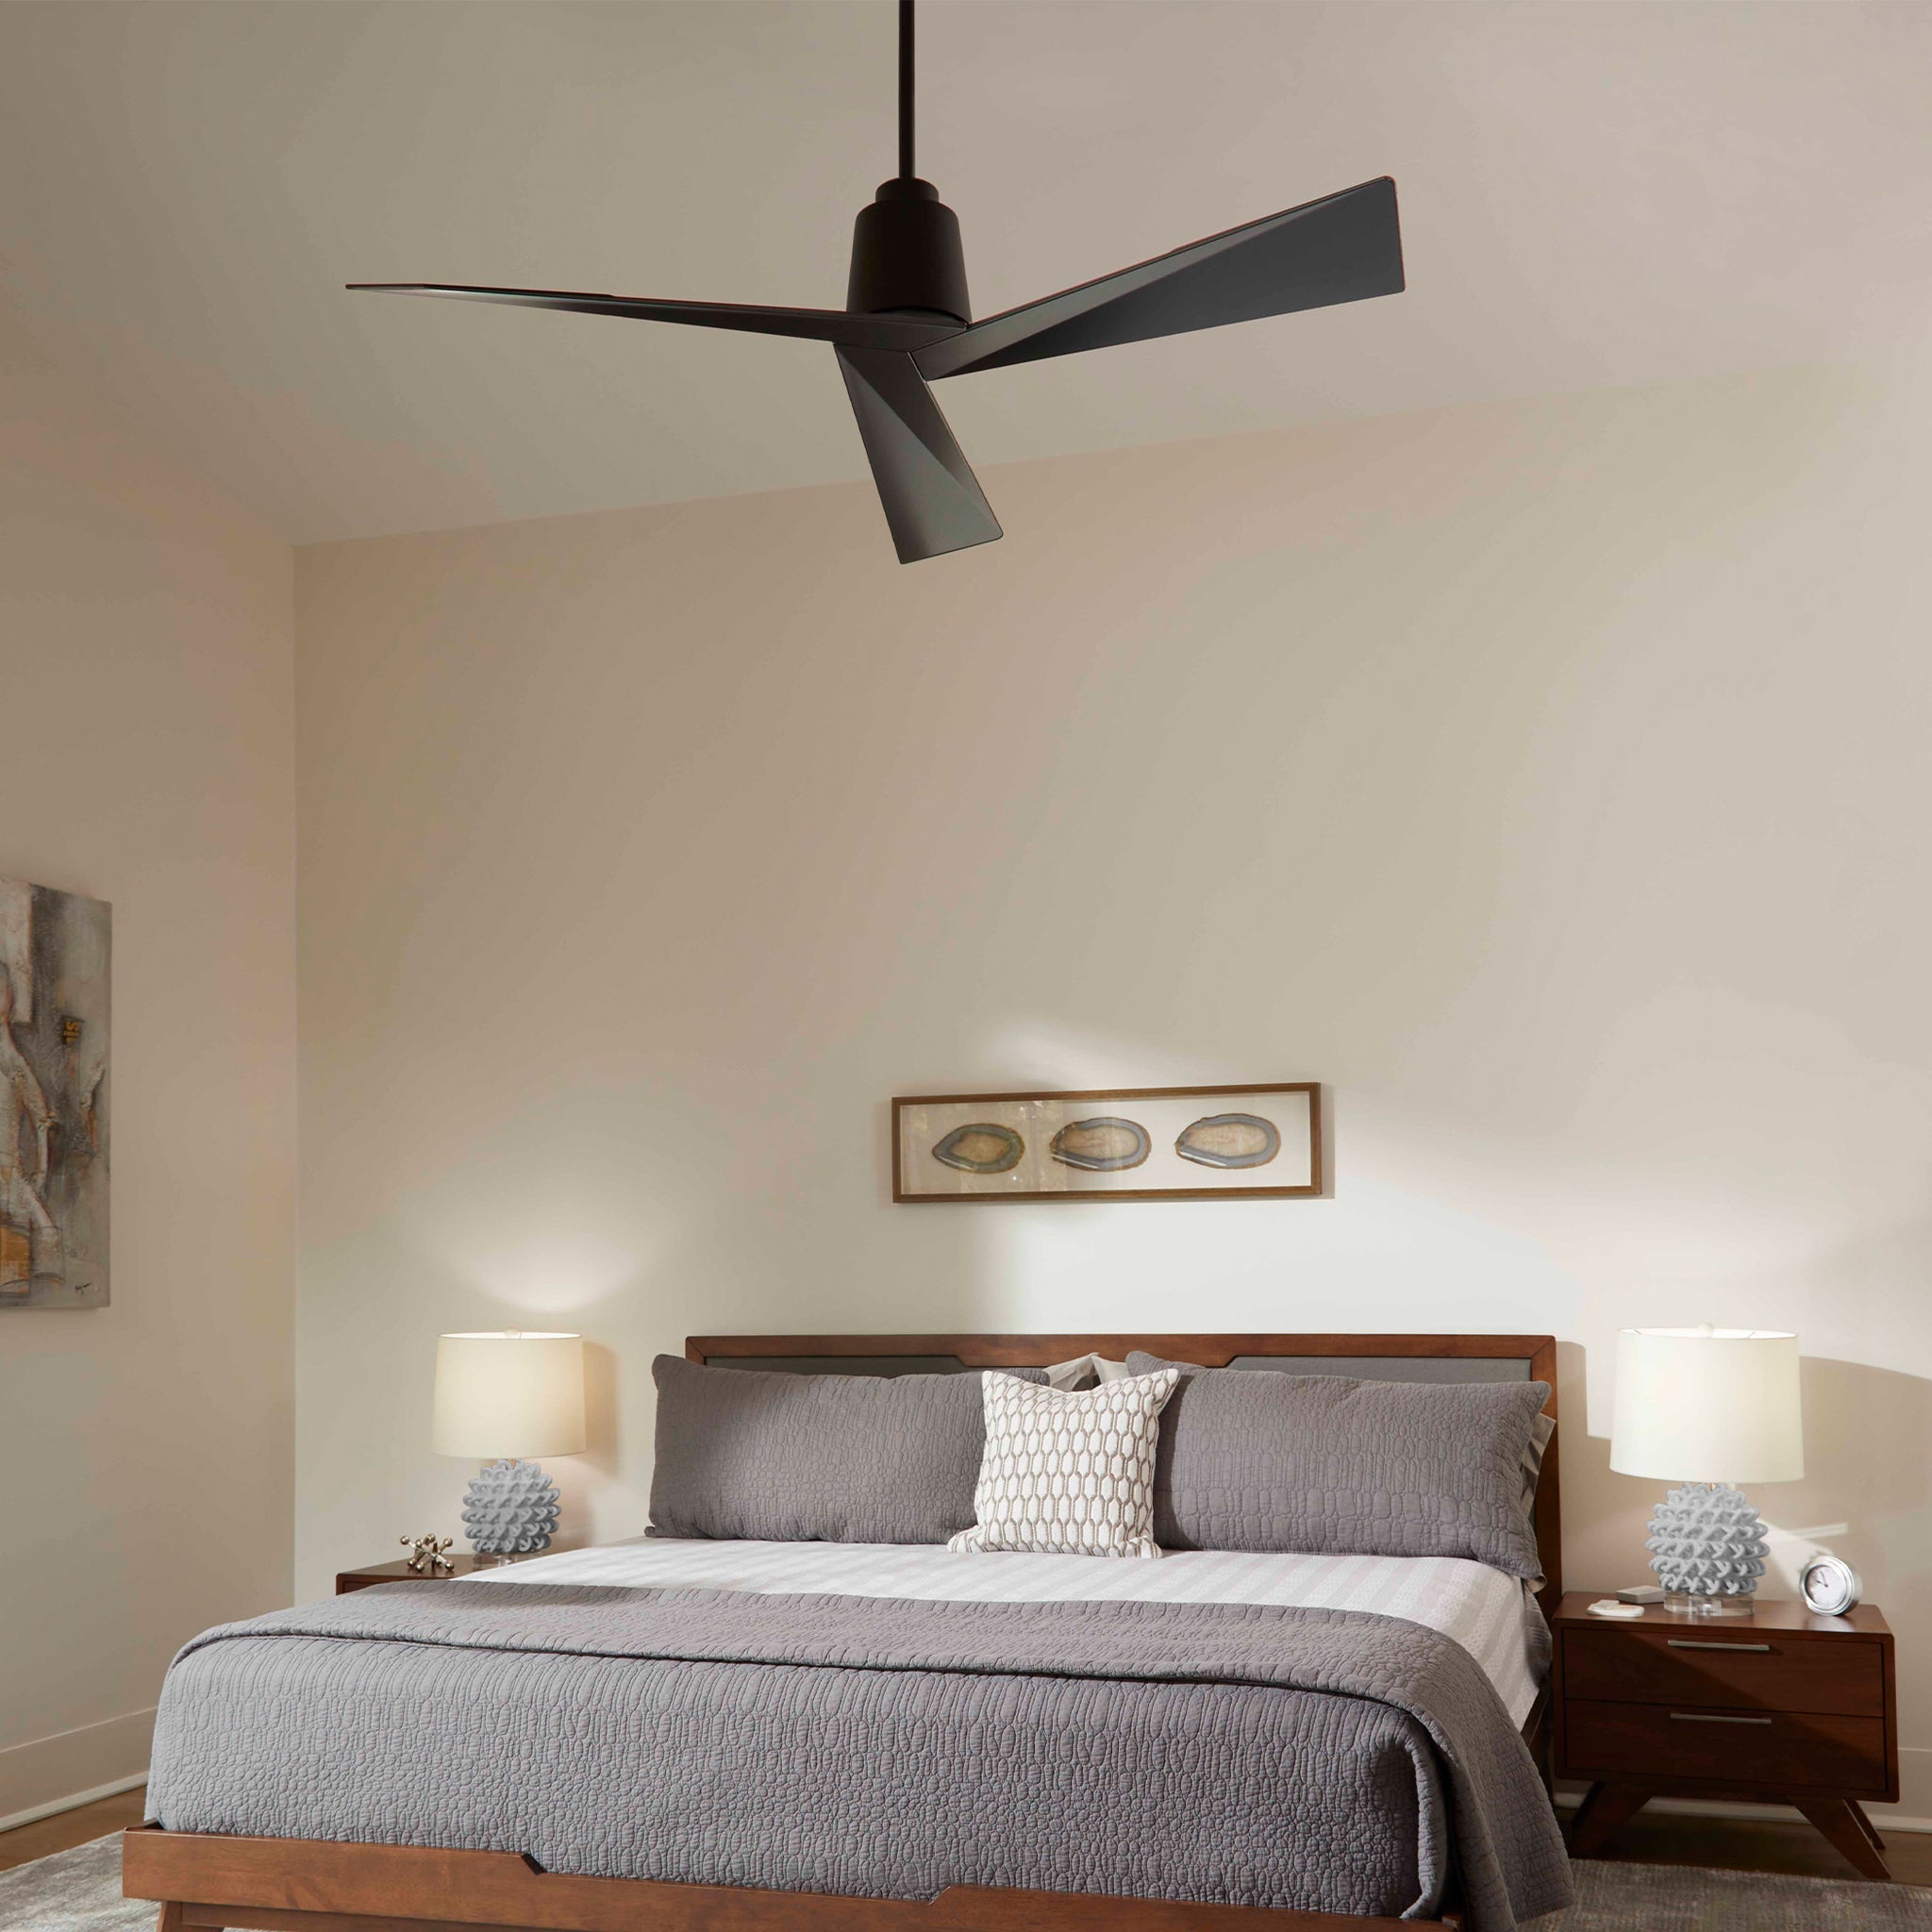 Oxygen DYNAMO Ceiling Fan - Modern, Contemporary - 54 Inch - Damp Rated - 6 Speeds - Reversible with Remote